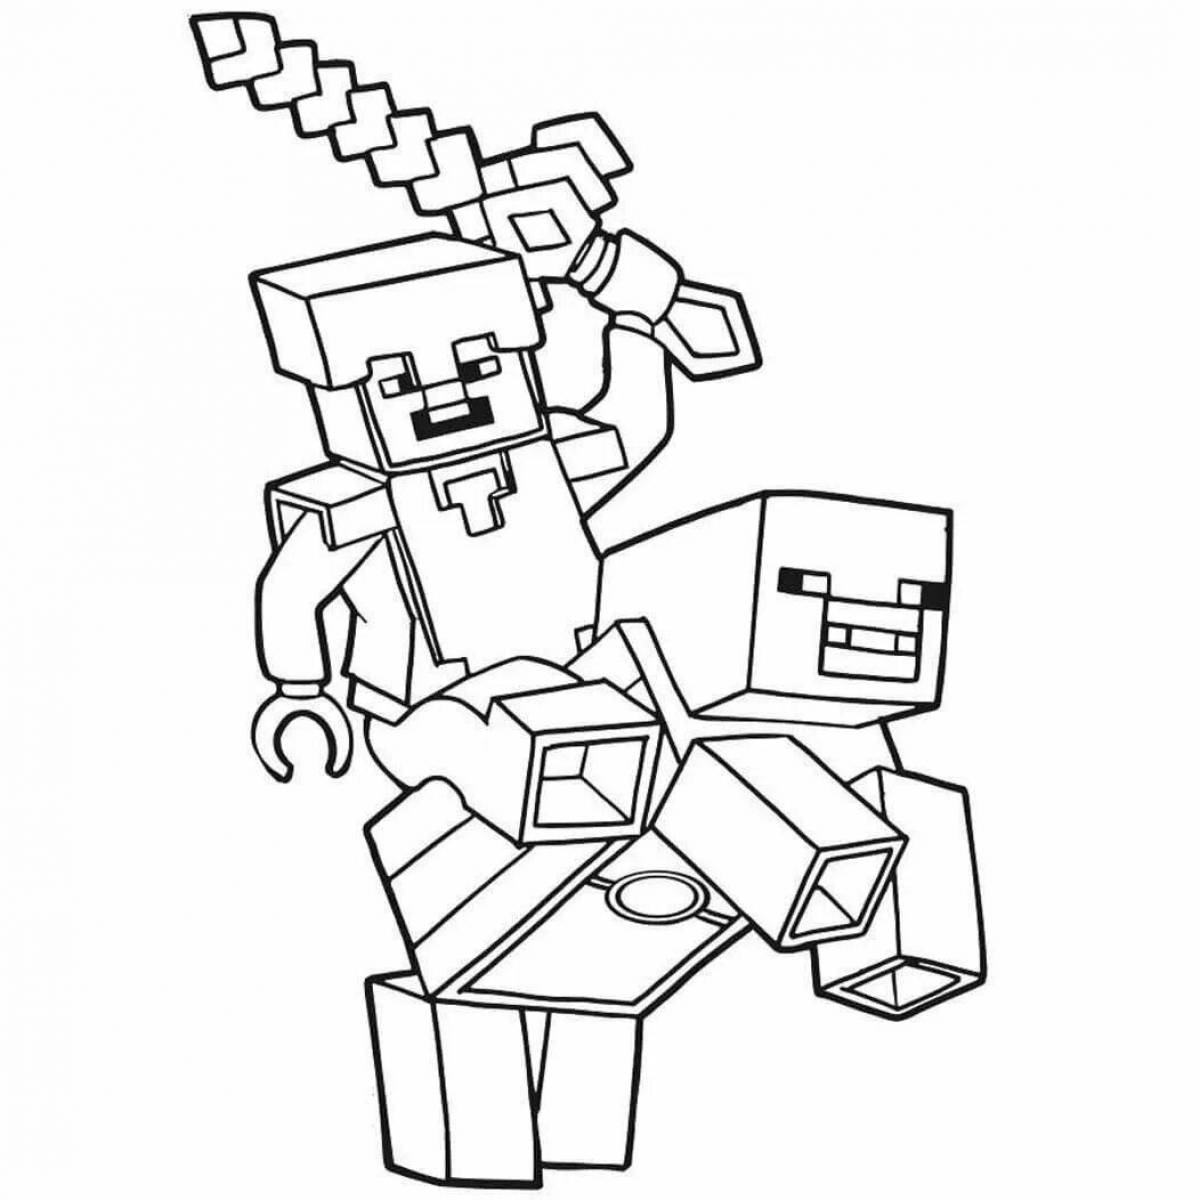 Awesome cool coloring minecraft